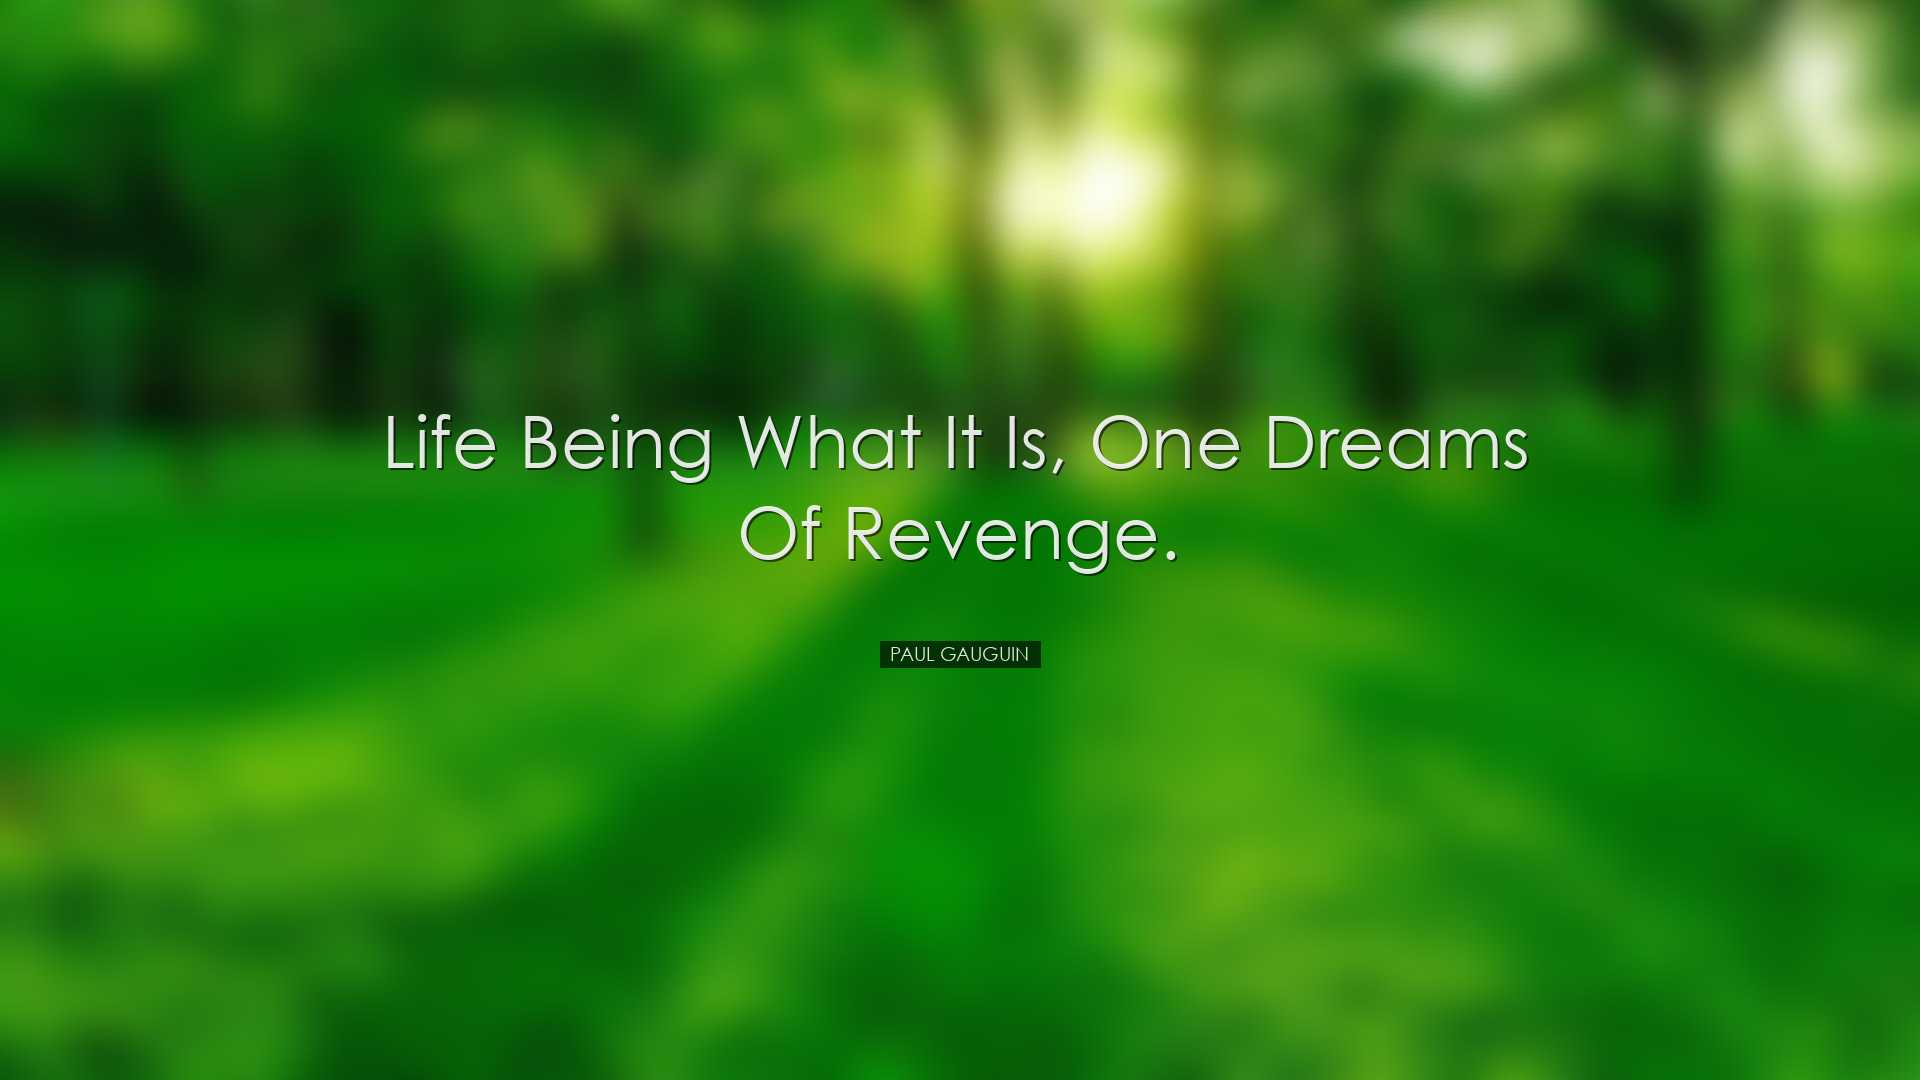 Life being what it is, one dreams of revenge. - Paul Gauguin